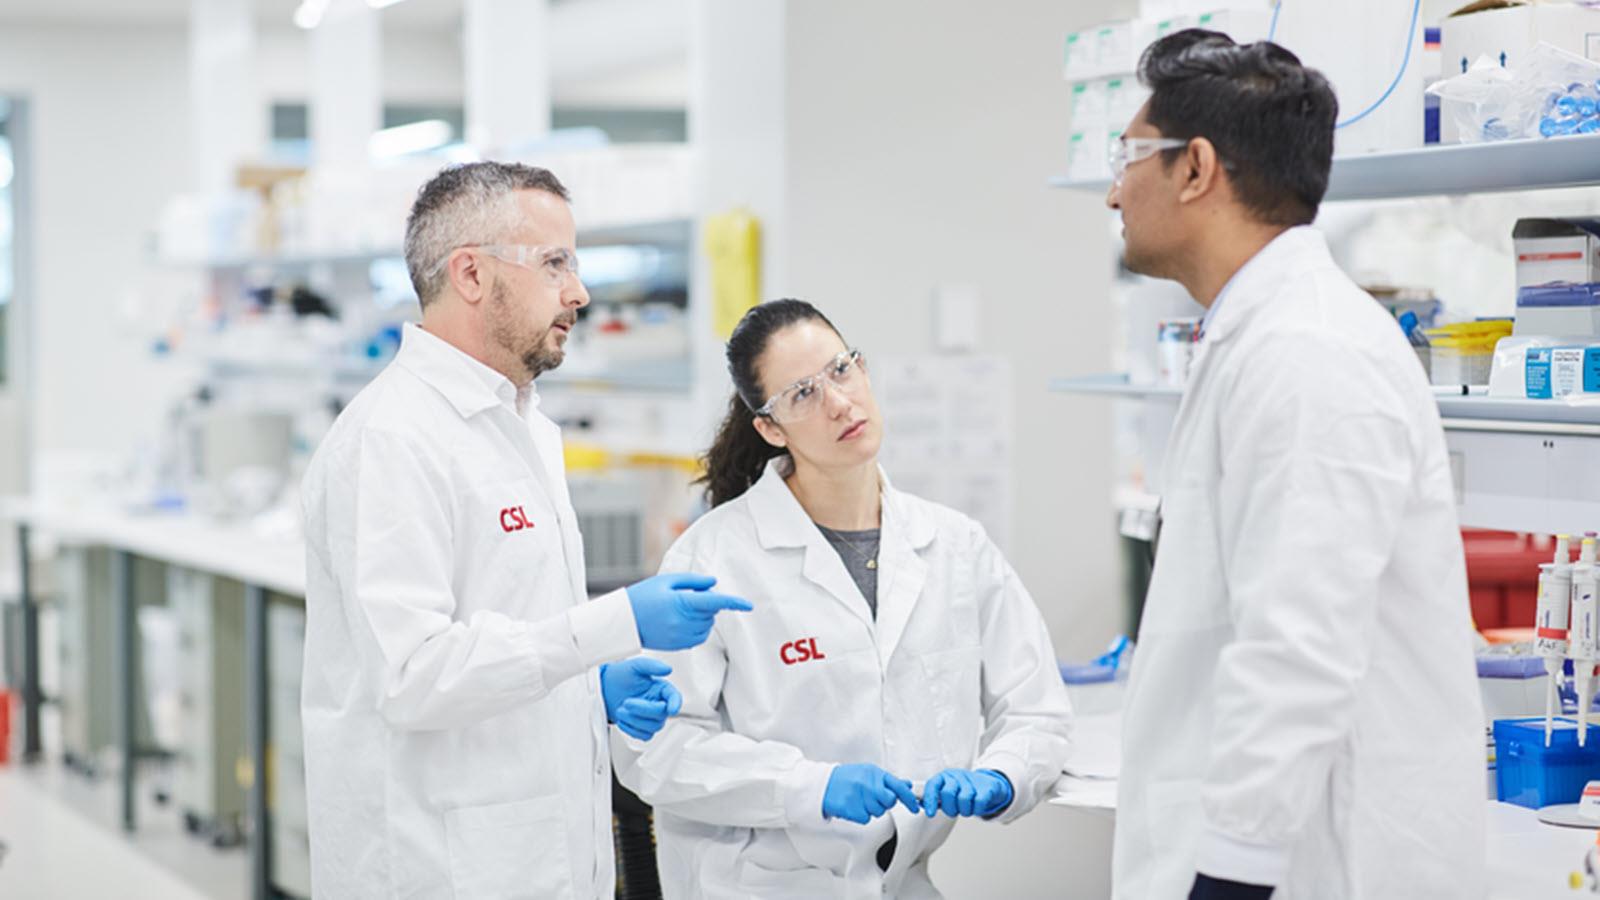 Two male and one female scientist talk in a lab environment